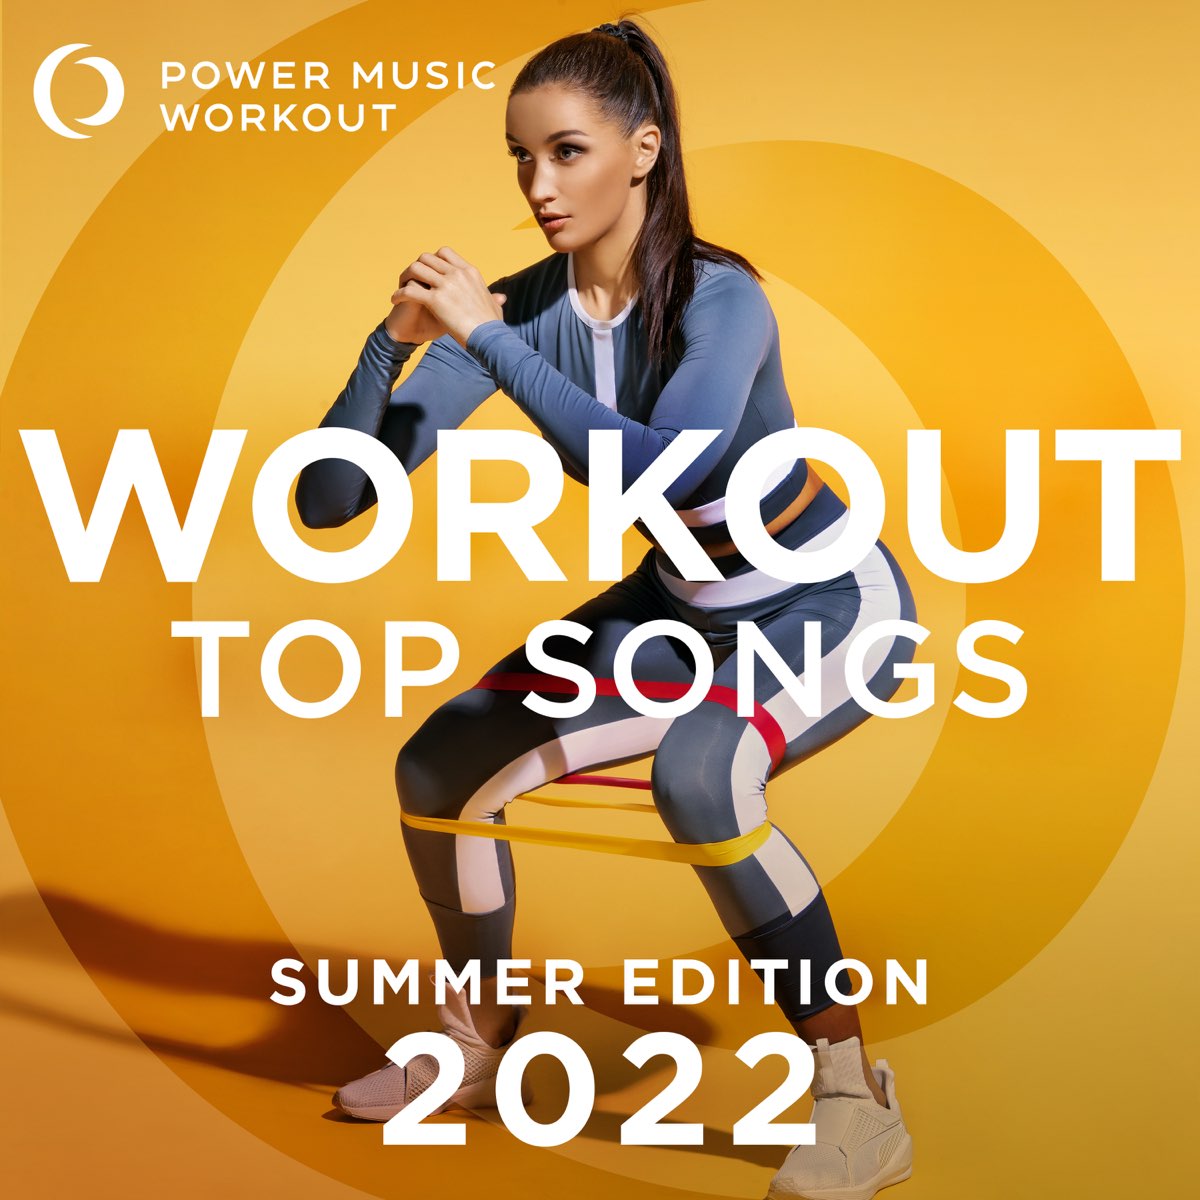 ‎Workout Top Songs 2022 Summer Edition by Power Music Workout on